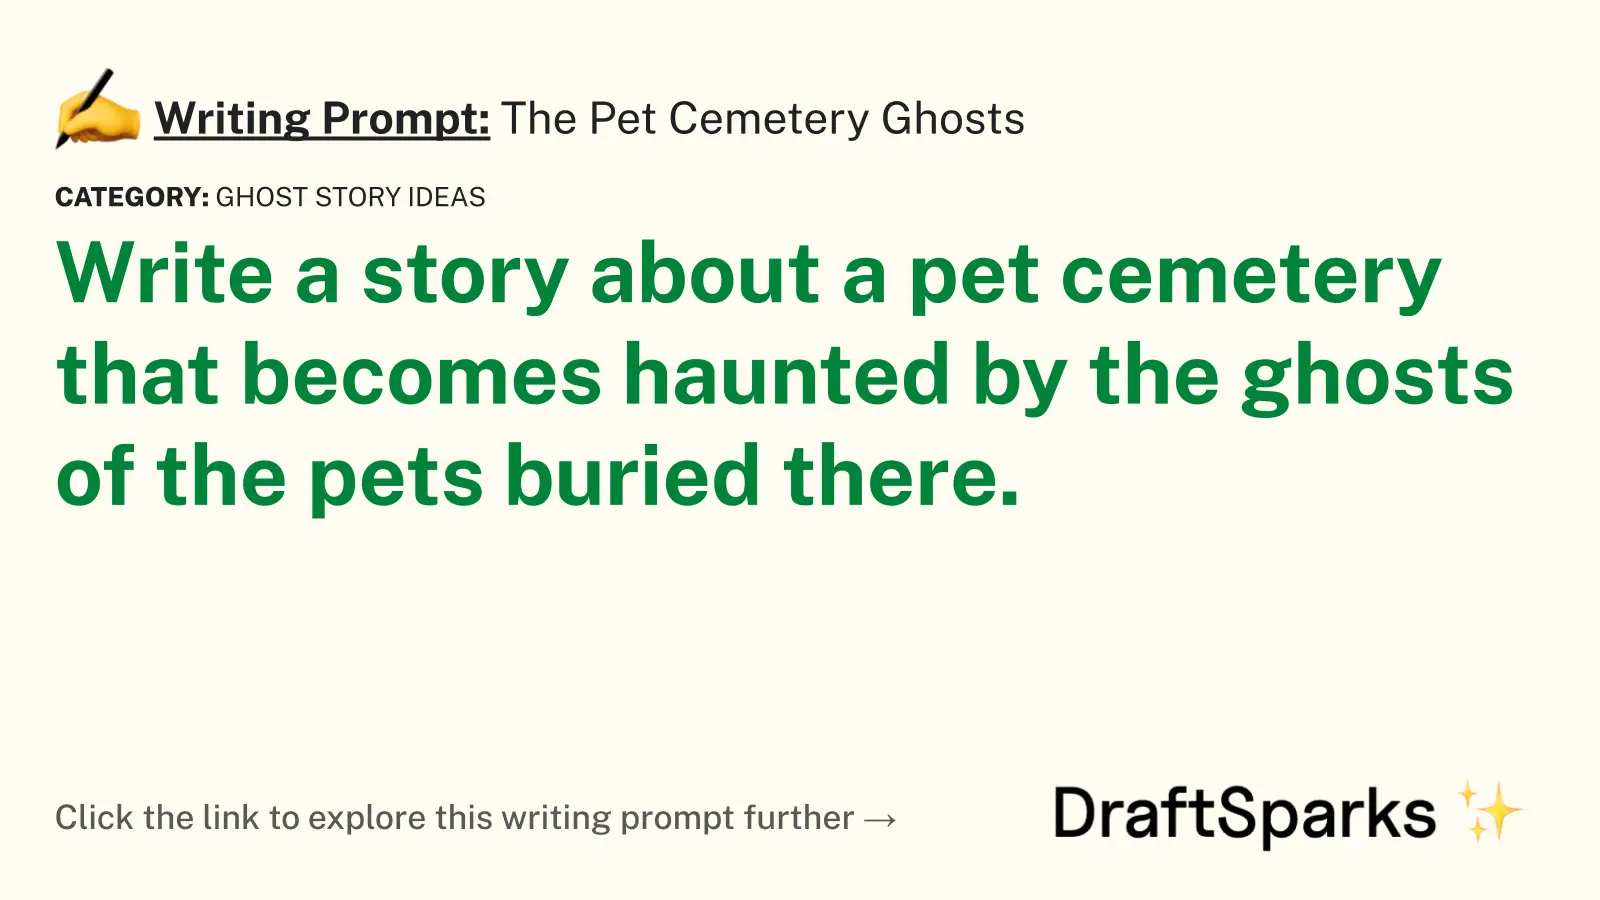 The Pet Cemetery Ghosts